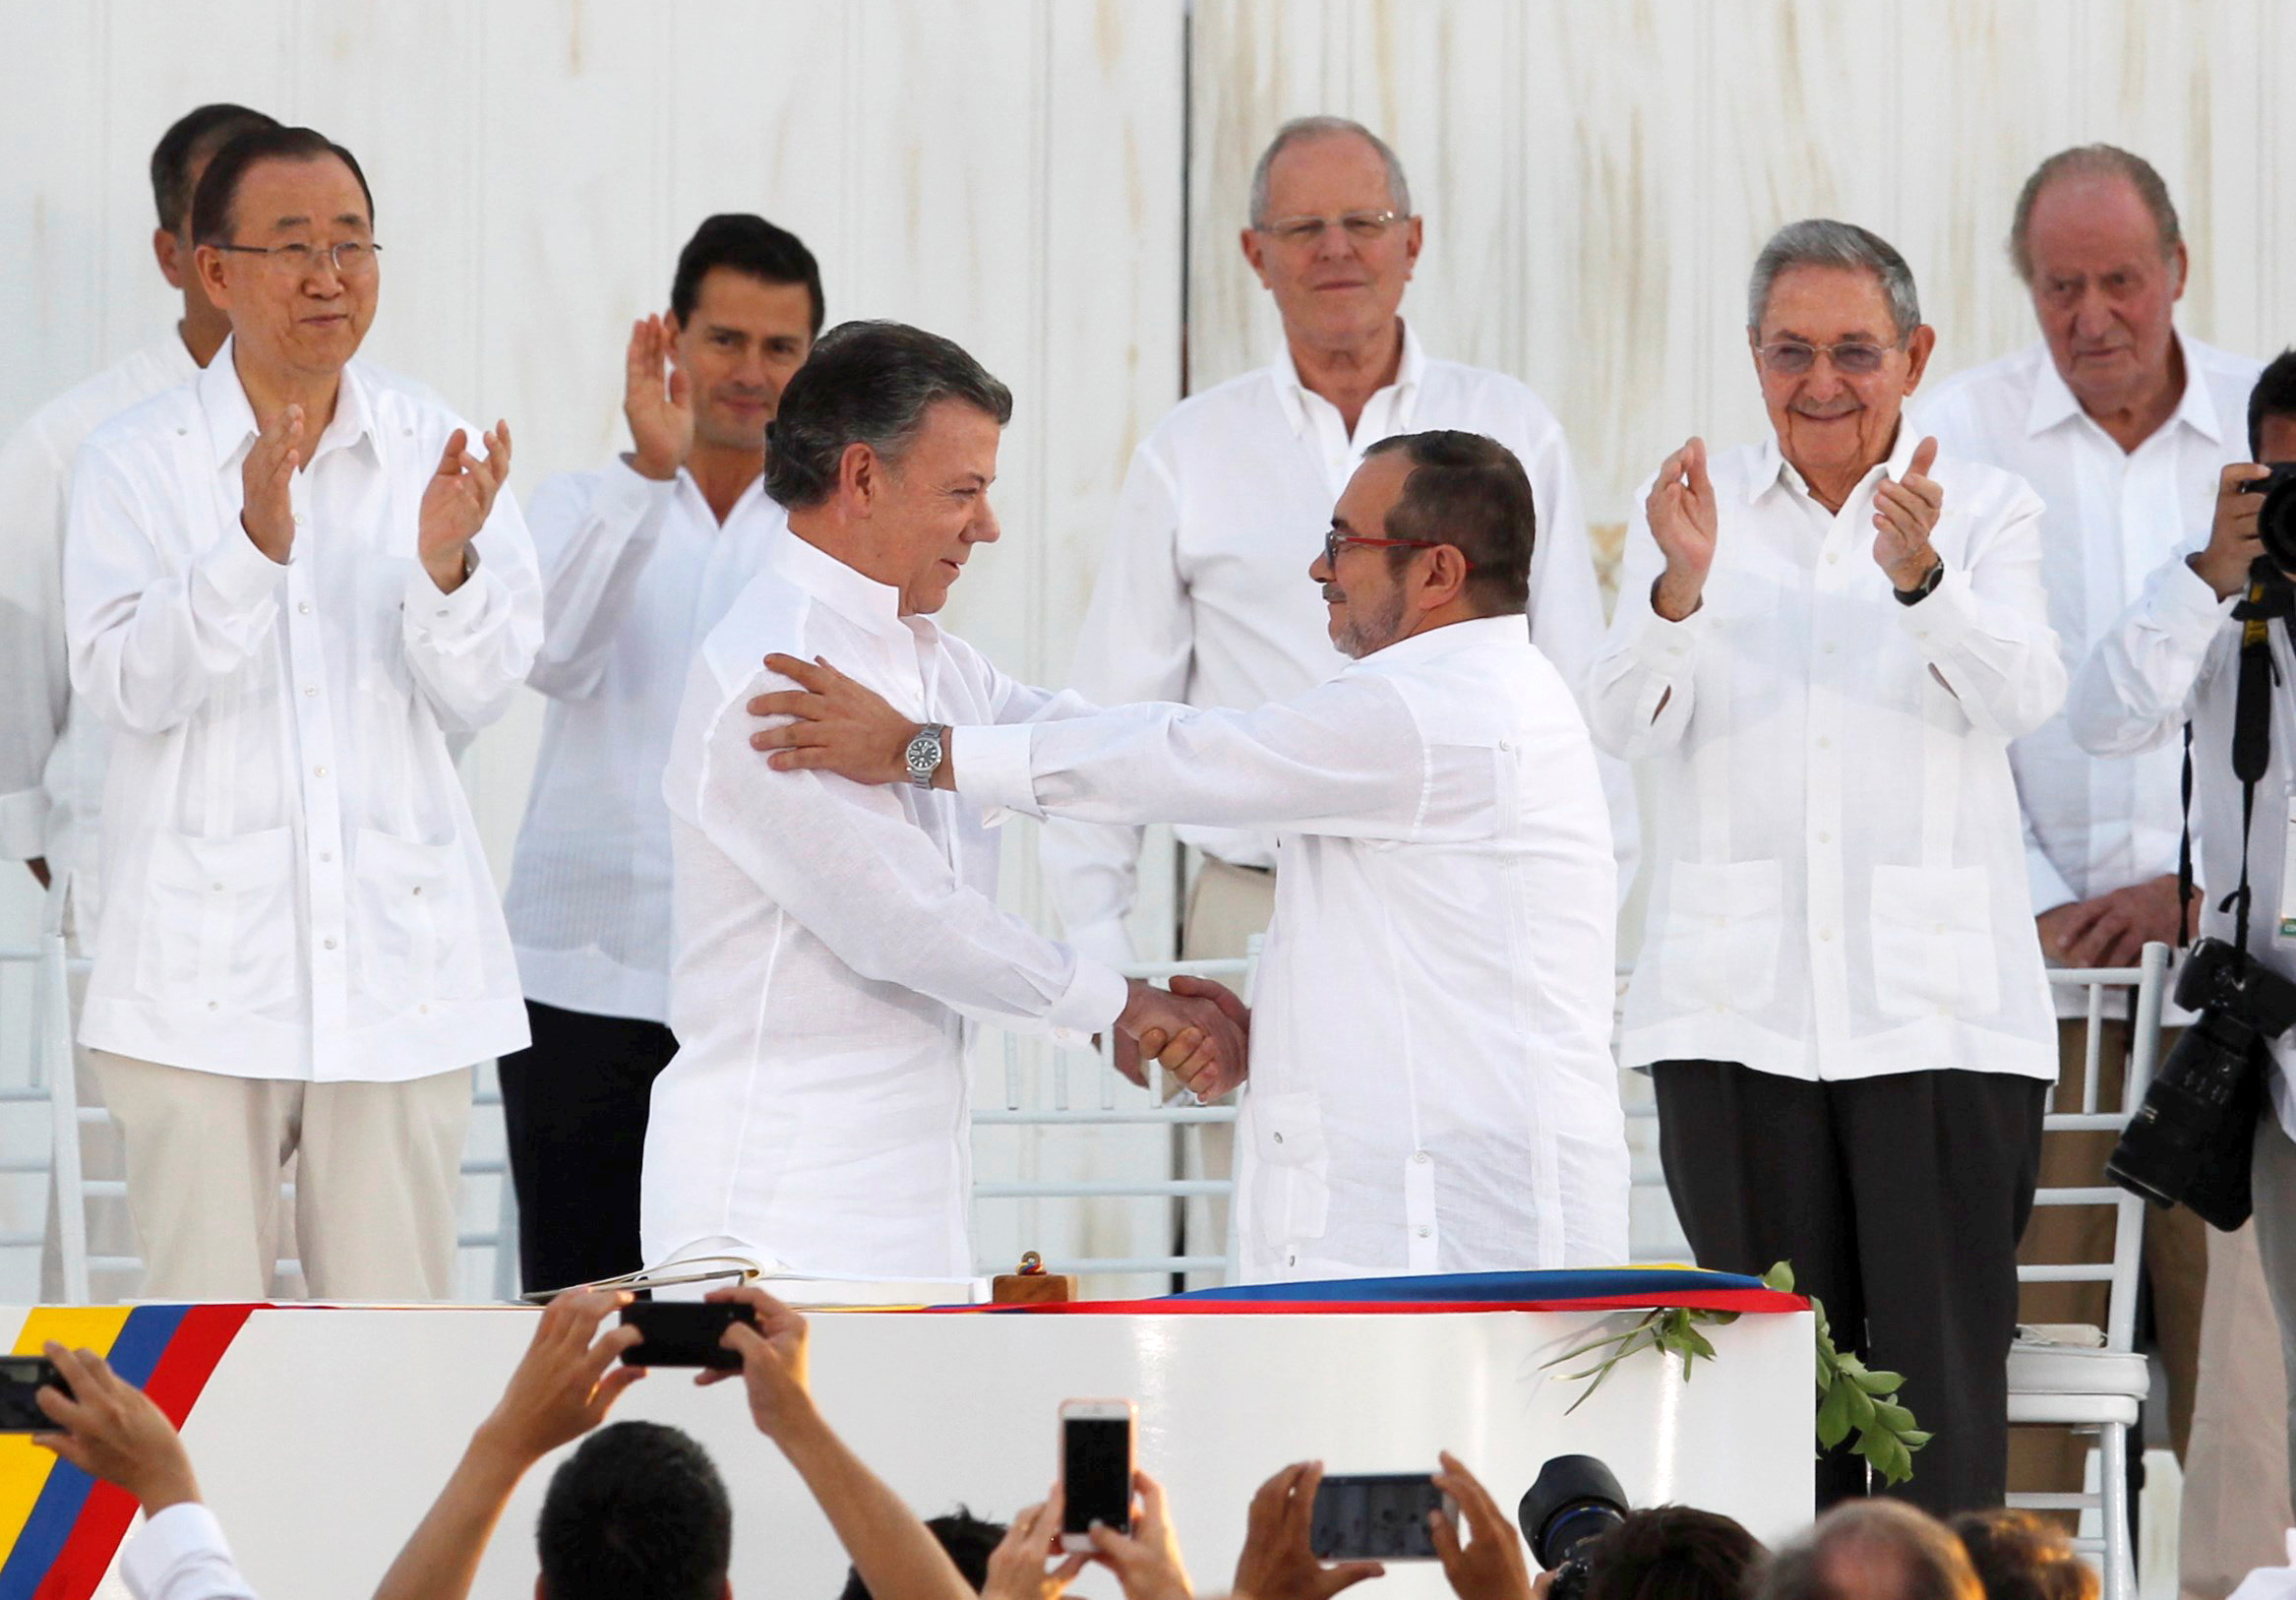 Colombian President Juan Manuel Santos and Marxist rebel leader Rodrigo Londono Echeverri of FARC, the Revolutionary Armed Forces of Colombia, shake hands Sept. 26 in Bogota after signing an agreement to end Latin America's last armed conflict. (CNS photo/John Vizcaino, Reuters)